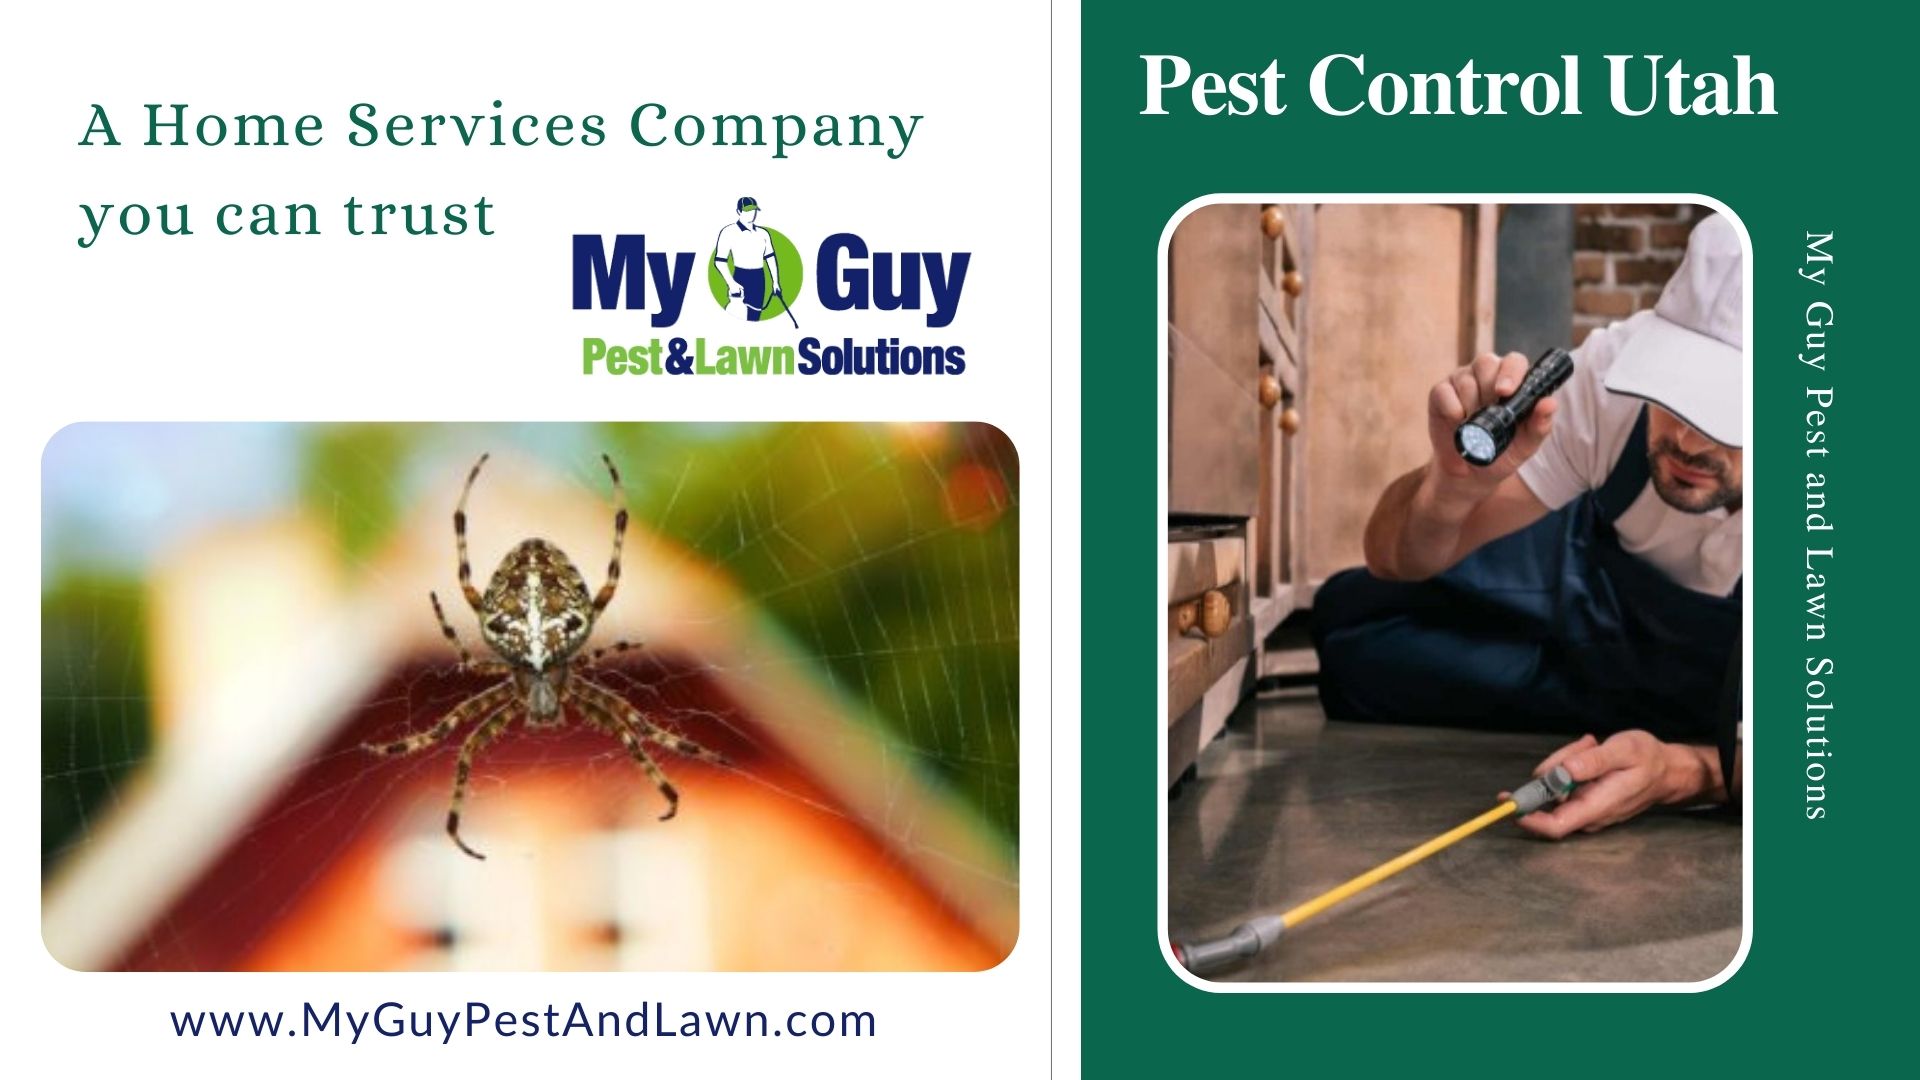 Pest Control Services and Pest Prevention Techniques in Utah